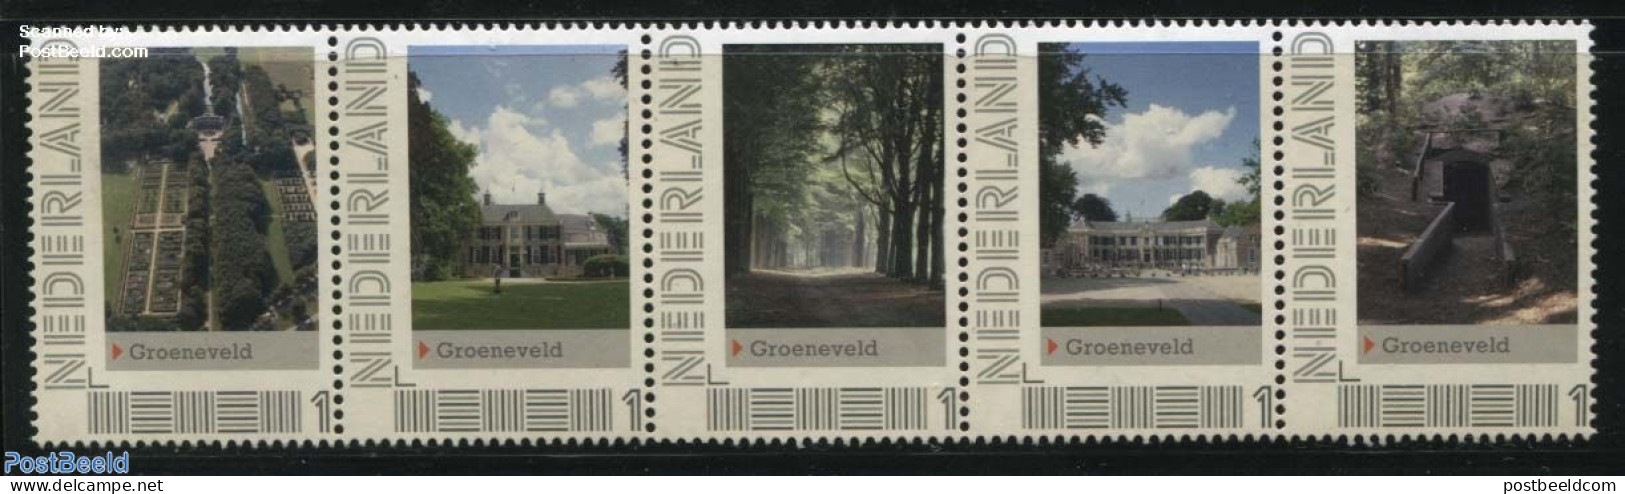 Netherlands - Personal Stamps TNT/PNL 2012 Groeneveld 5V [::::], Mint NH, Nature - Trees & Forests - Castles & Fortifi.. - Rotary Club